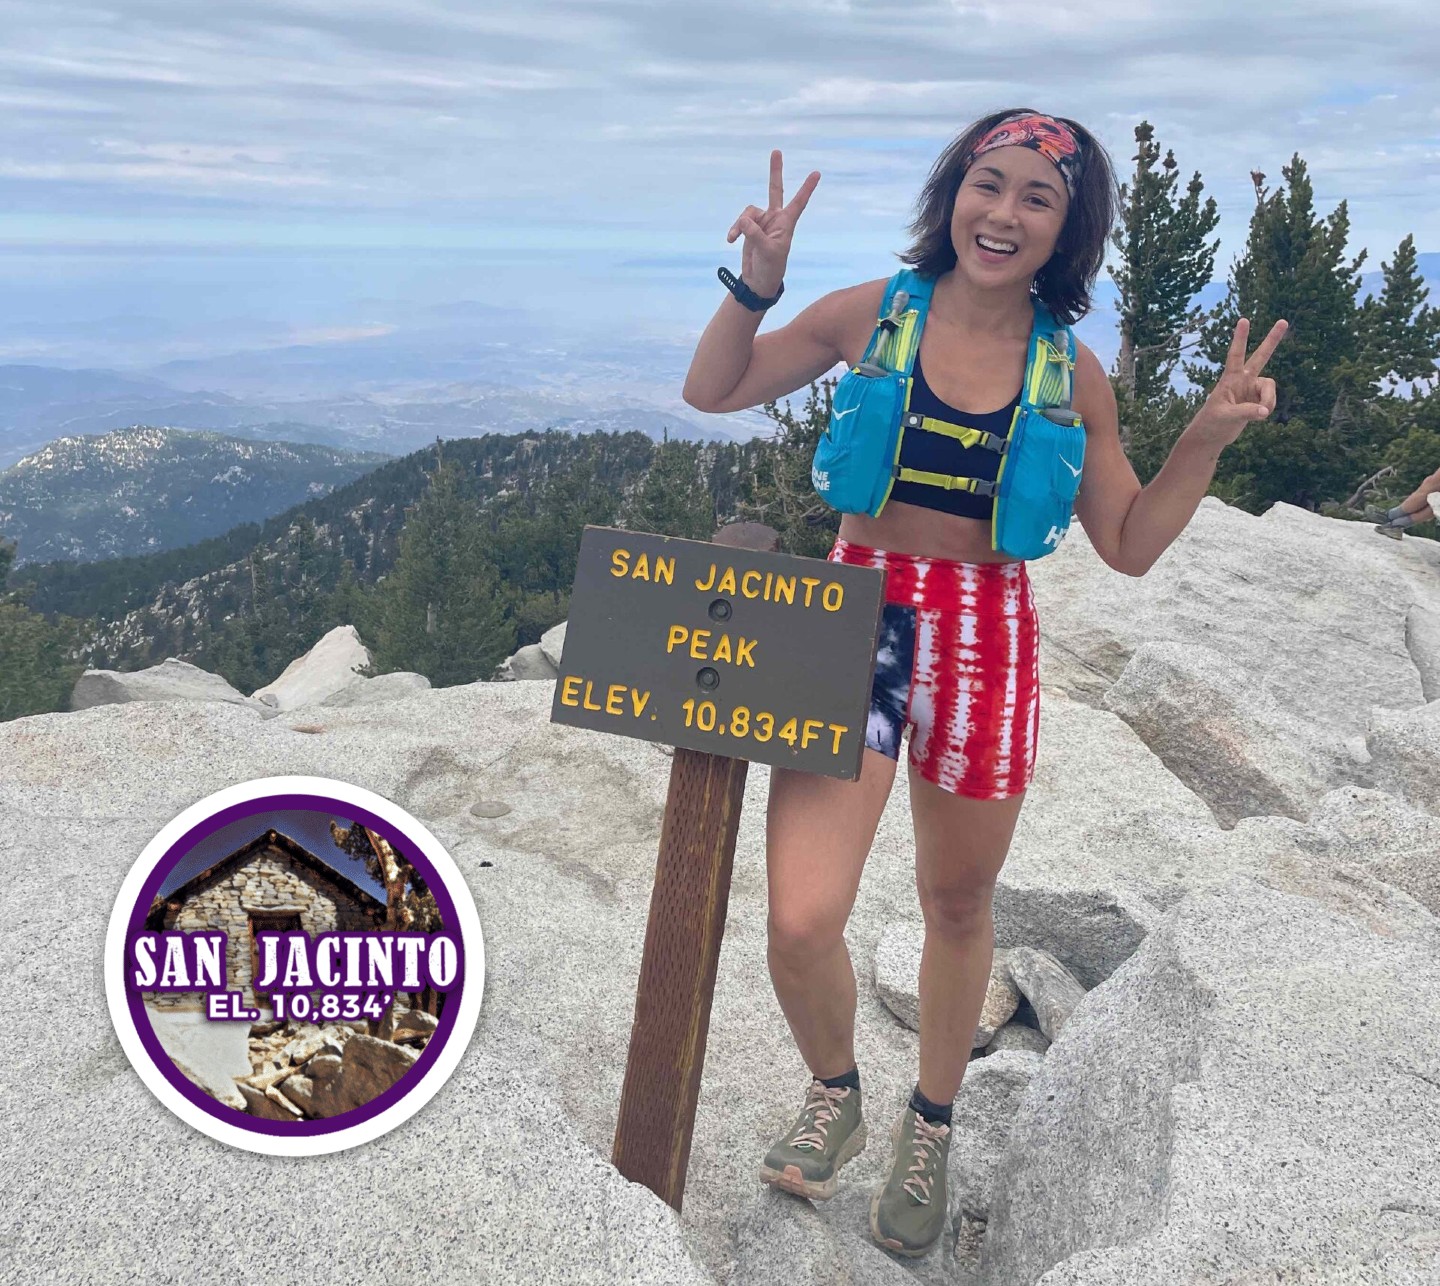 six pack of peaks challenge, trail running, southern california trails, hiking, san jacinto